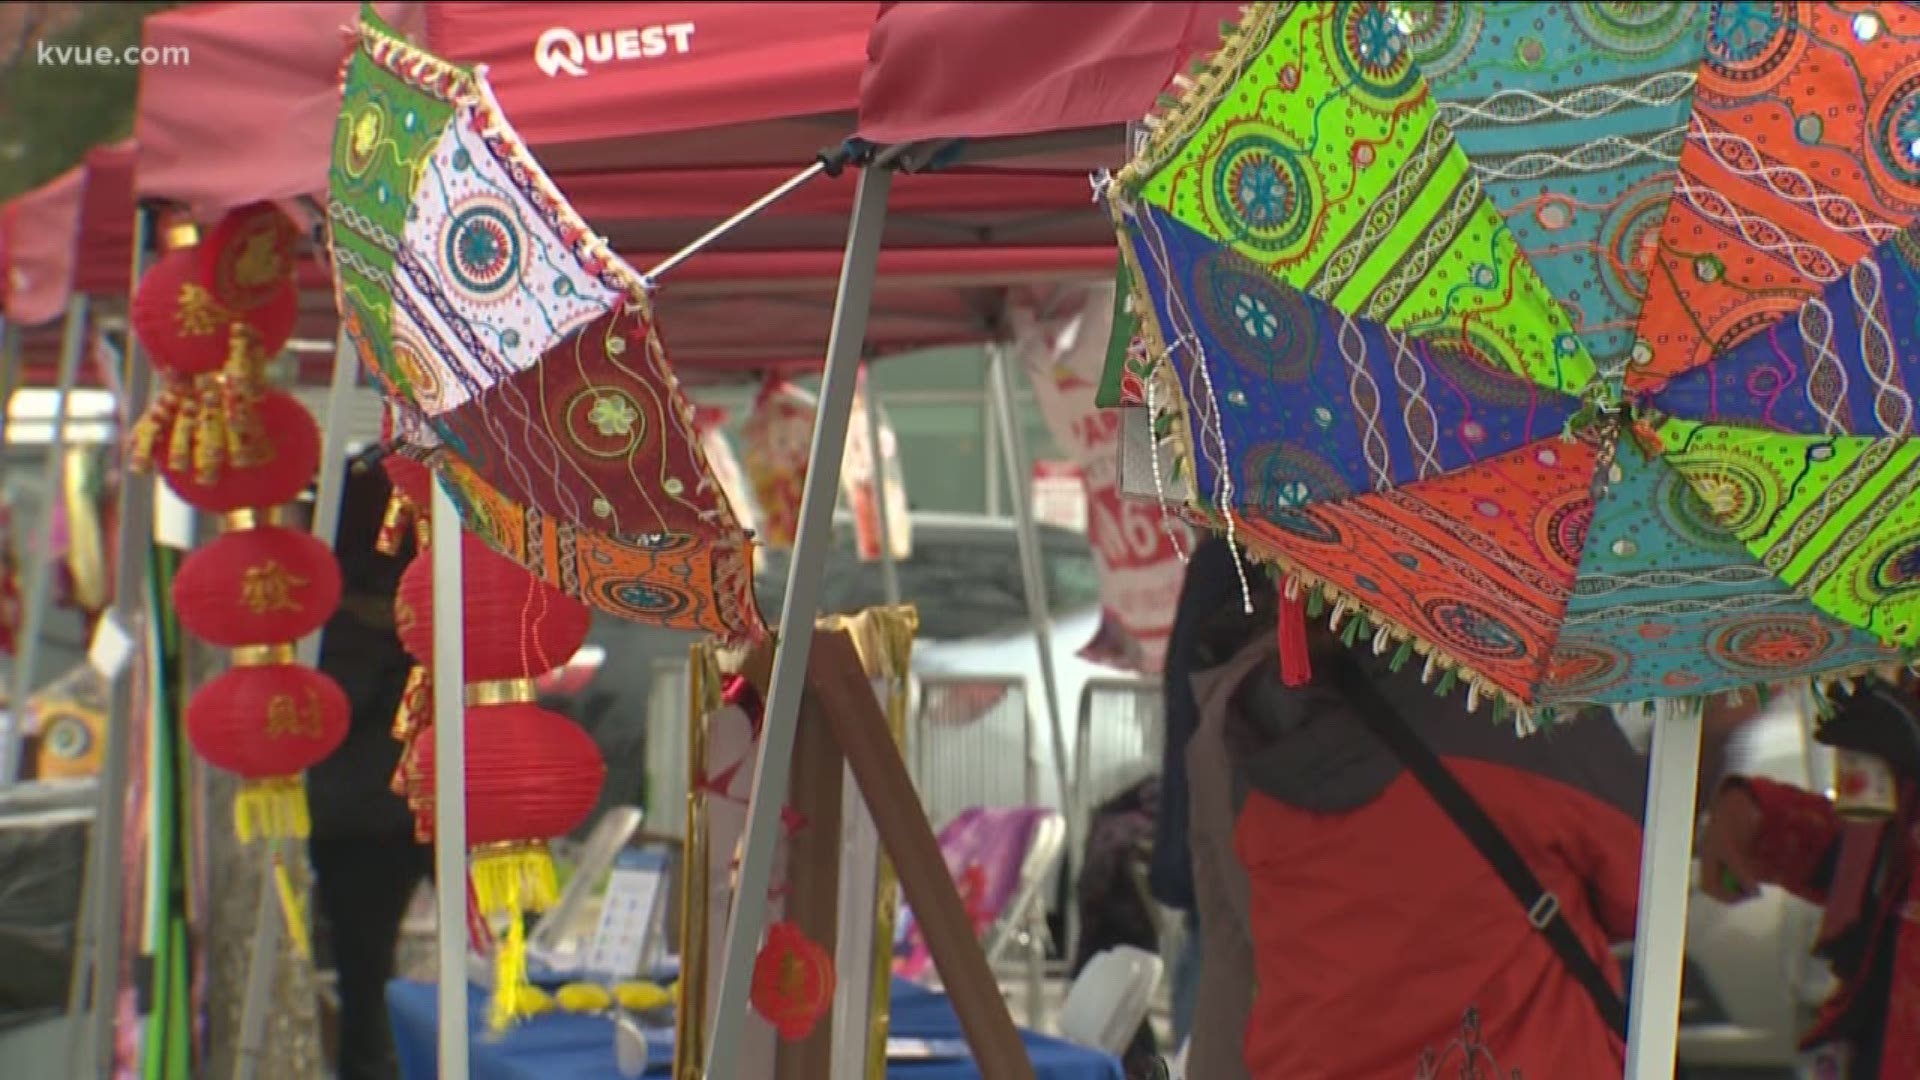 Thousands continued to celebrate the Lunar New Year in North Austin this weekend at the Chinatown Center off of North Lamar. Festivities continued with dragon dances, musical performances and fireworks.